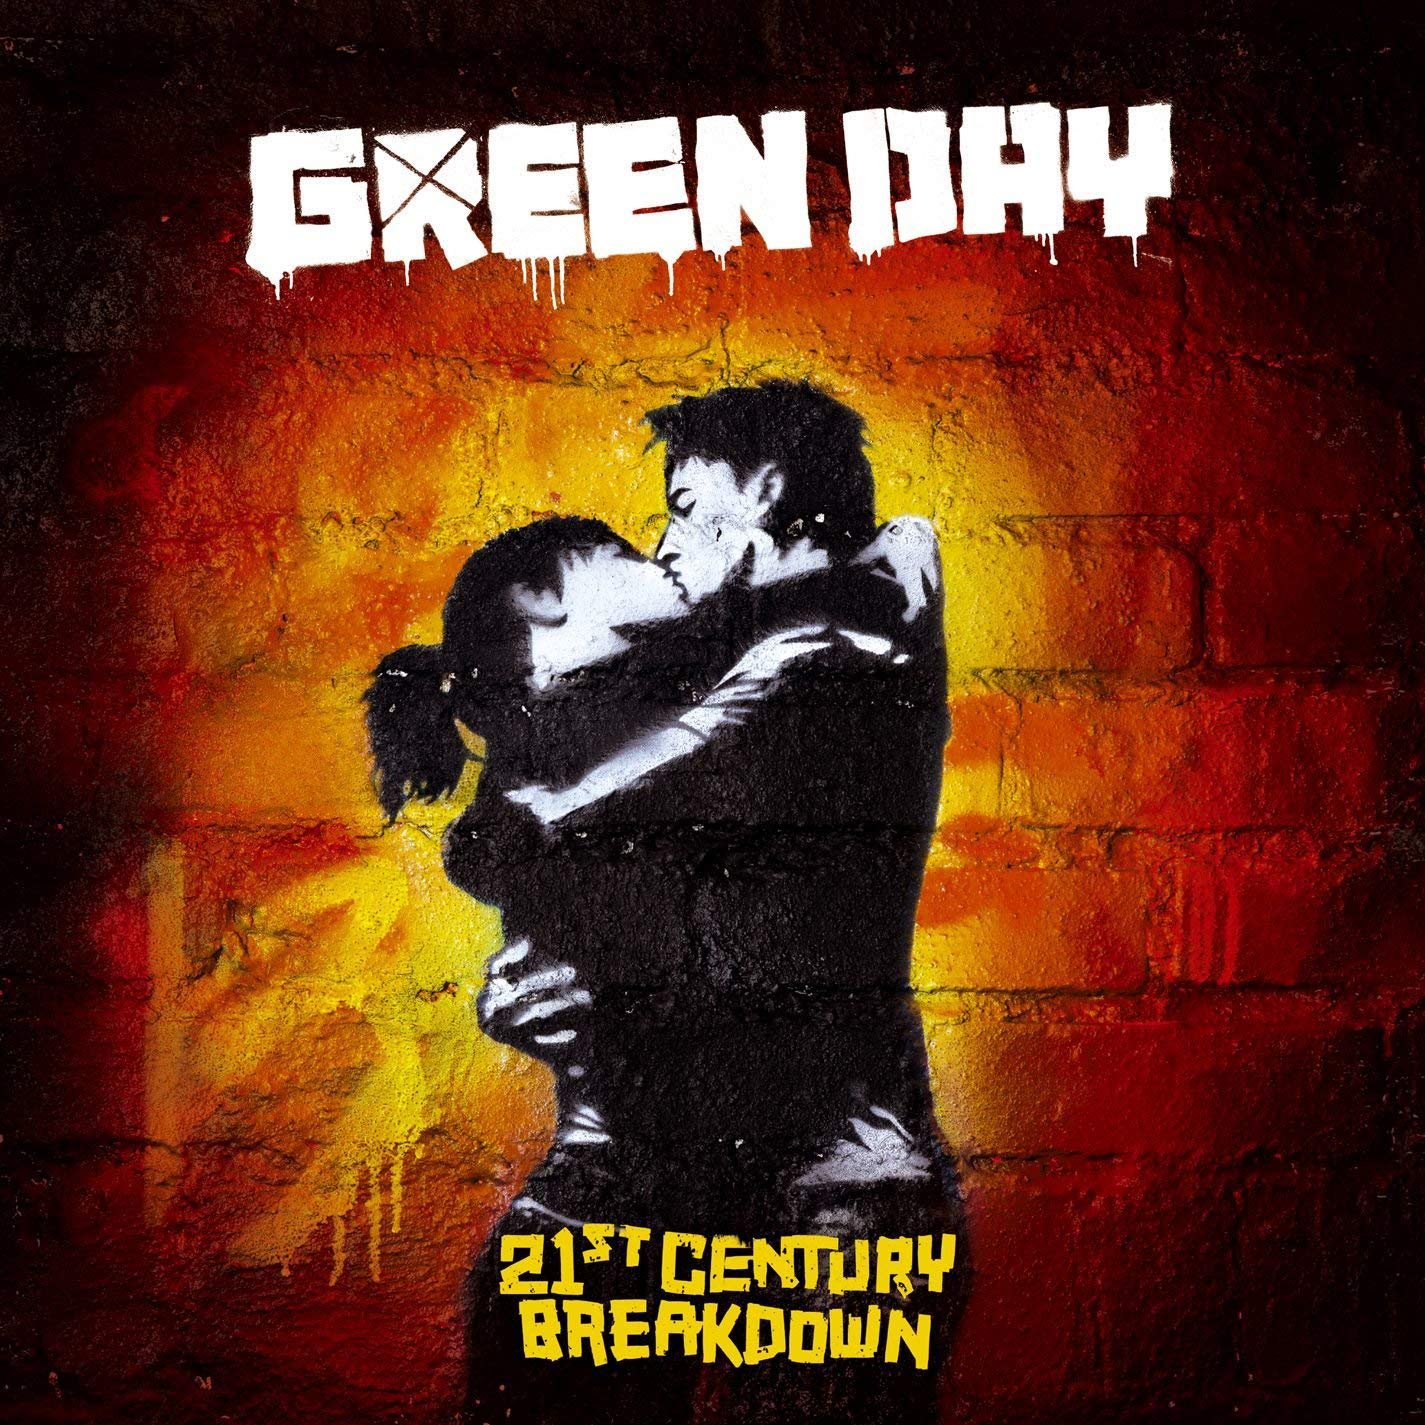 Art for 21 Guns by Green Day